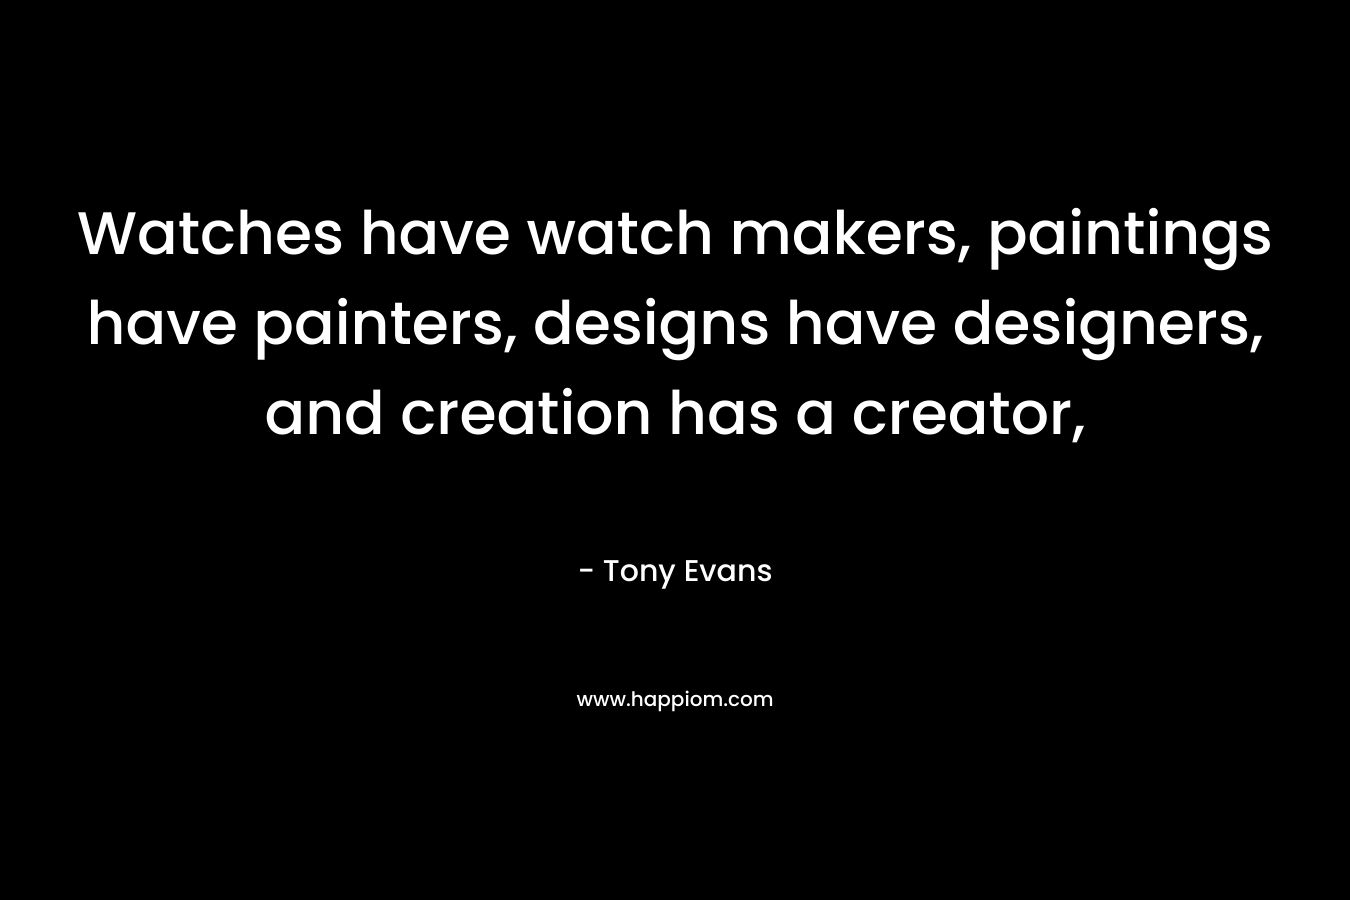 Watches have watch makers, paintings have painters, designs have designers, and creation has a creator, – Tony Evans